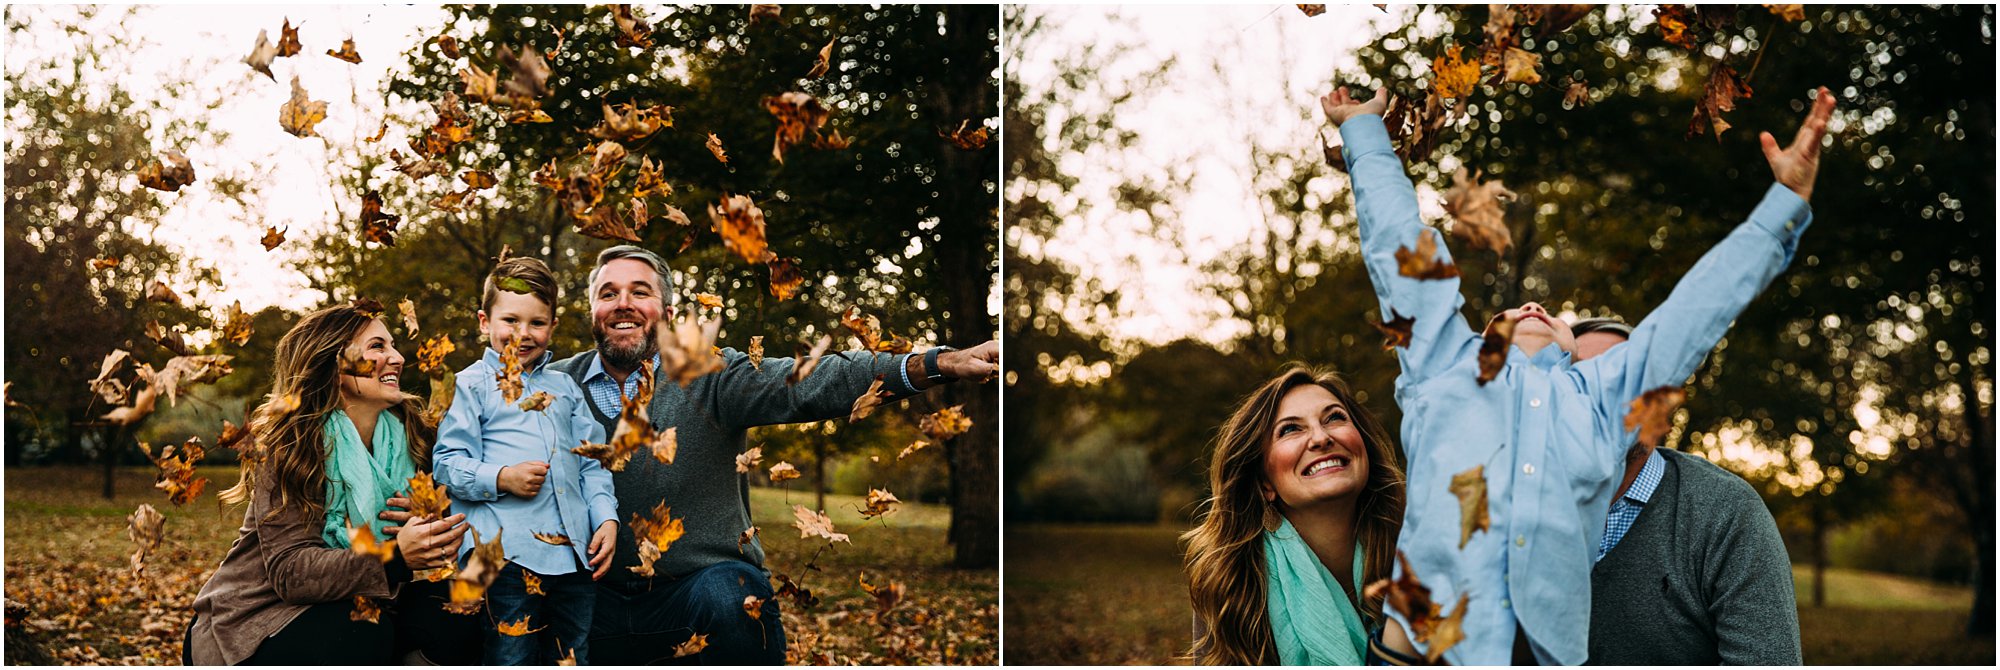 Little boy throwing fall leaves into the air as parents laugh and watch in excitement in Nashville 